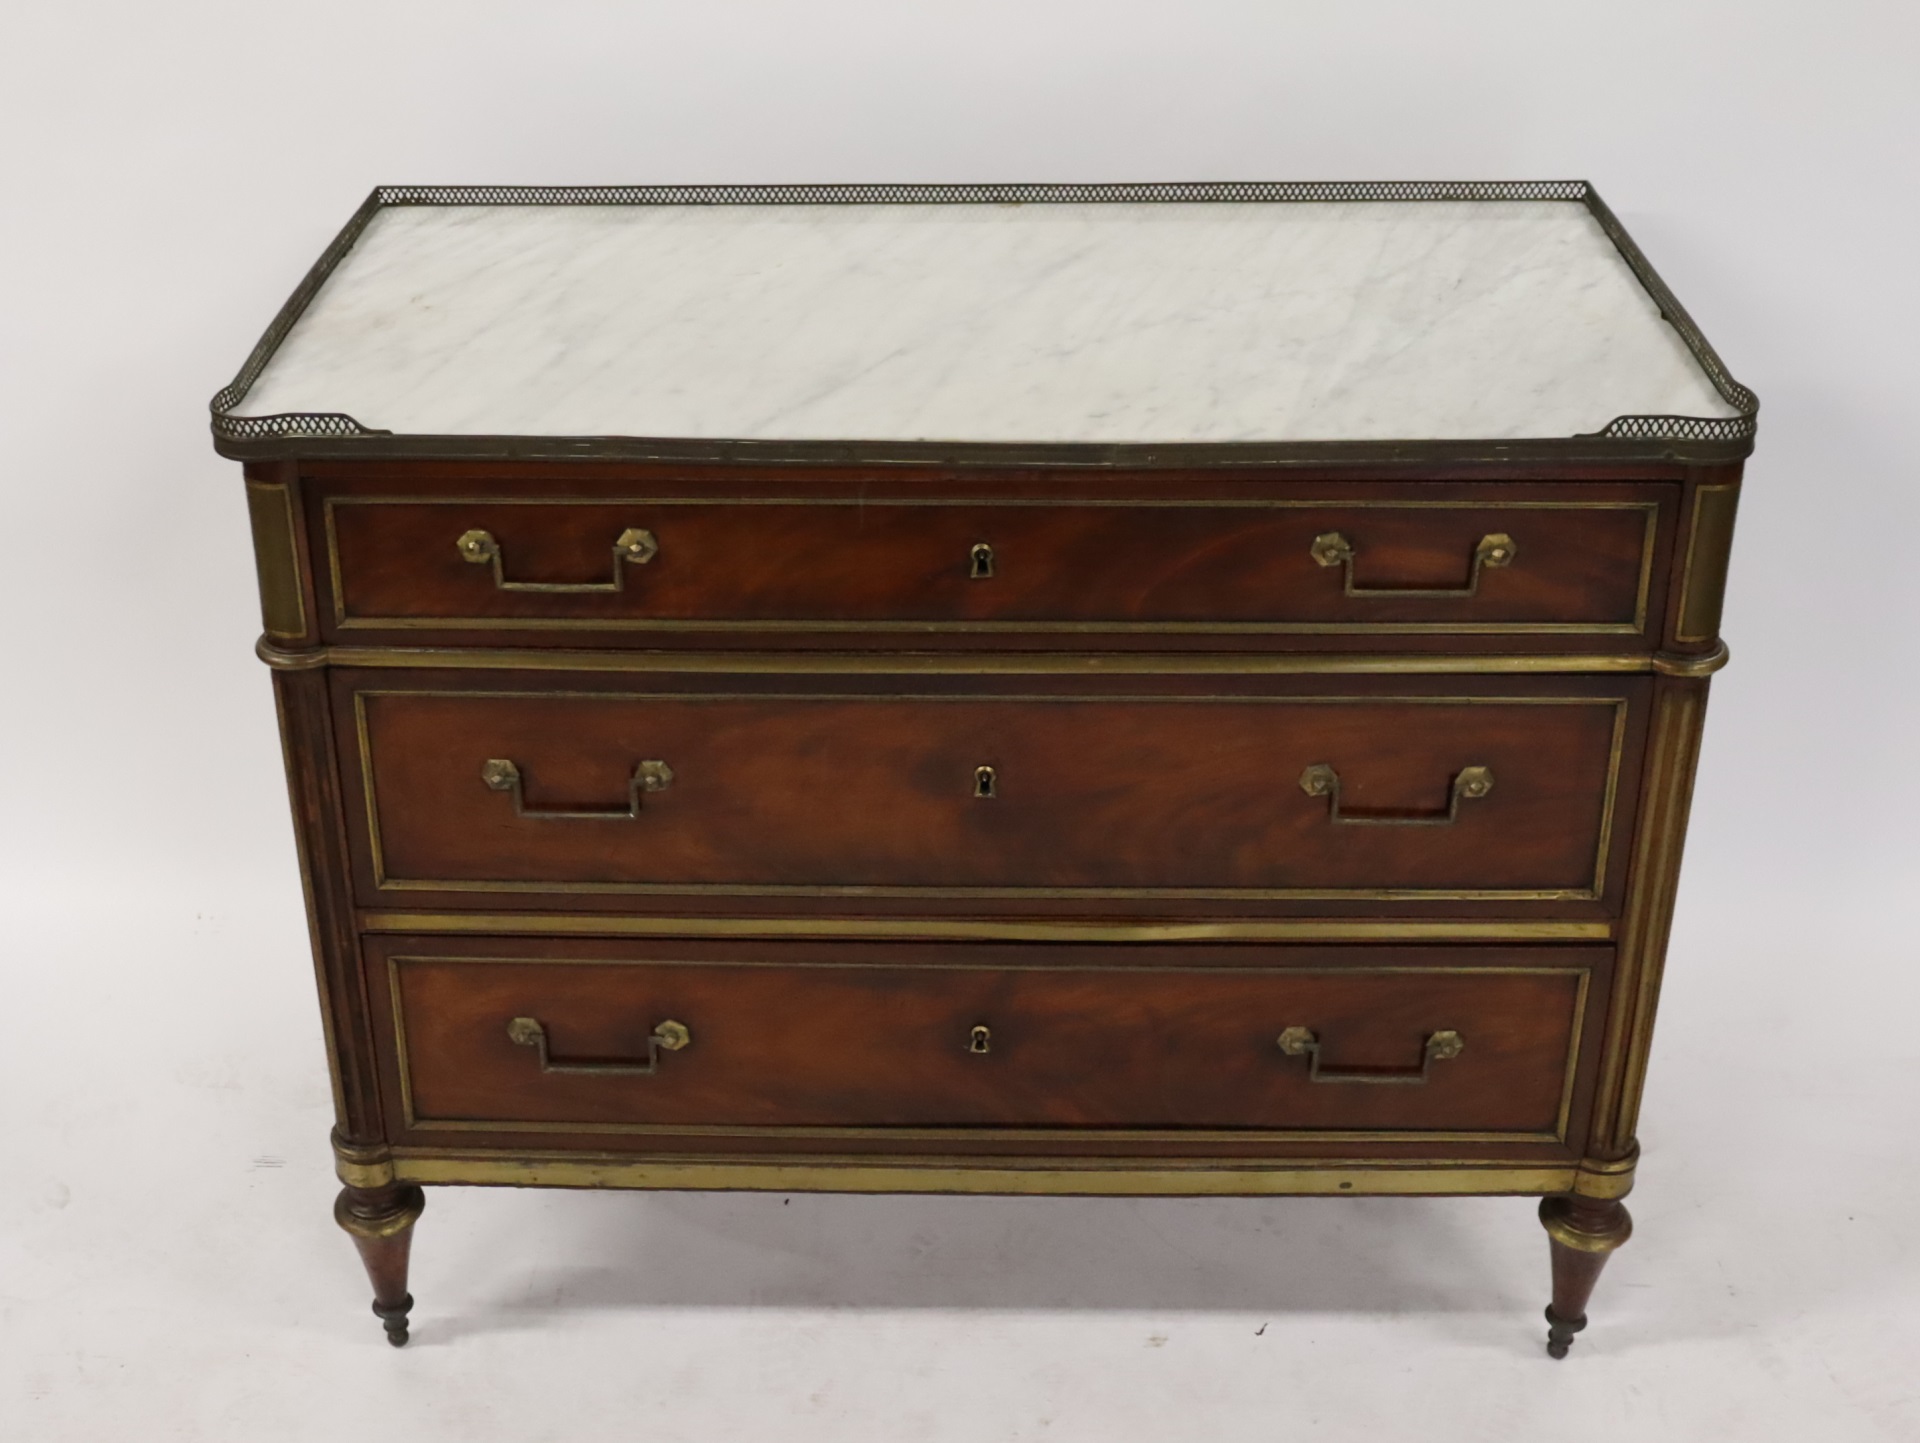 LOUIS XV1 STYLE BRASS INLAID MARBLETOP